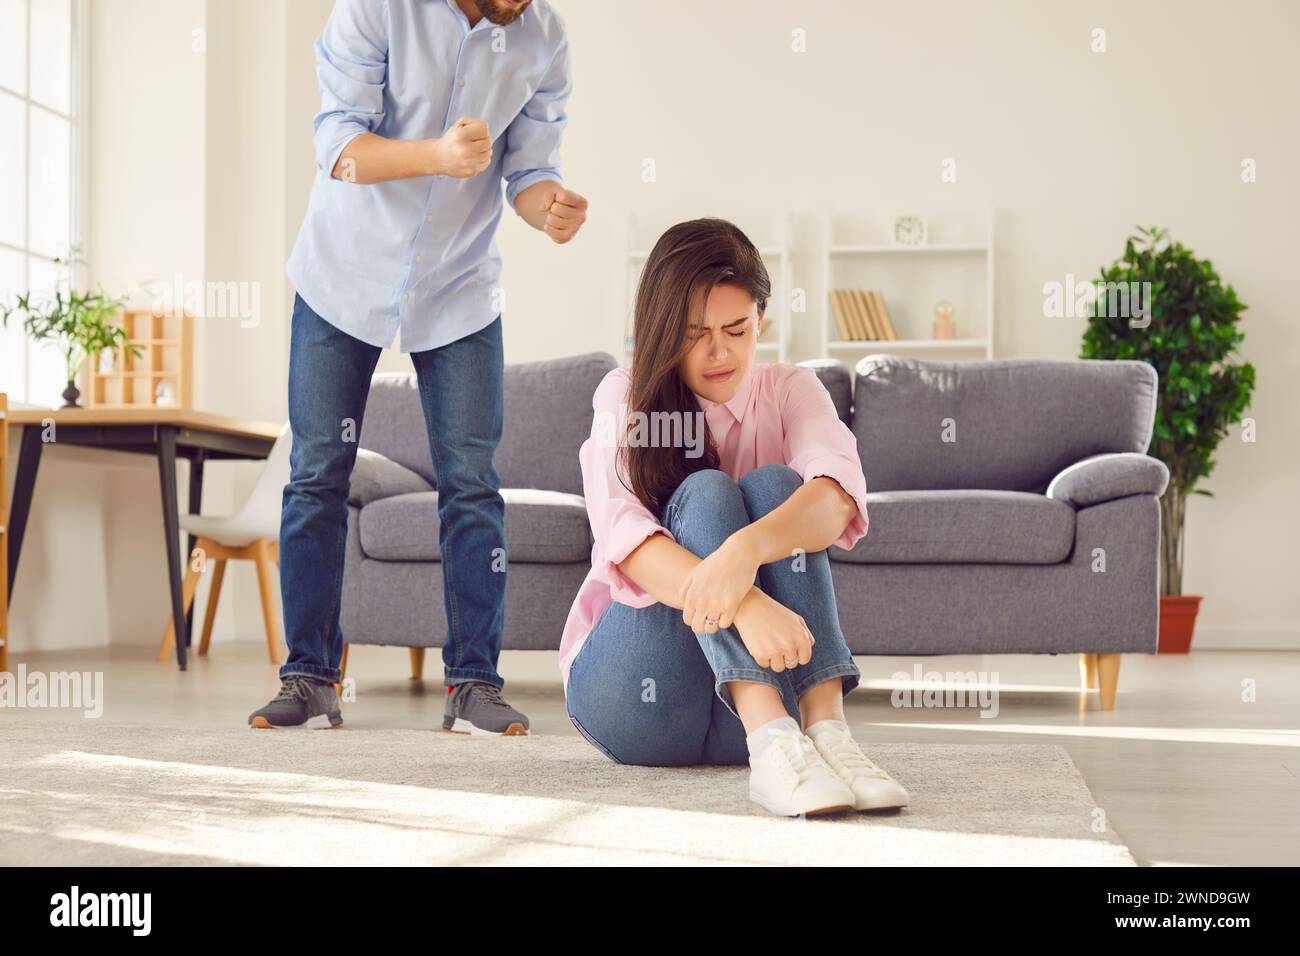 Angry man standing near upset unhappy woman sitting on floor and shouting on her at home Stock Photo